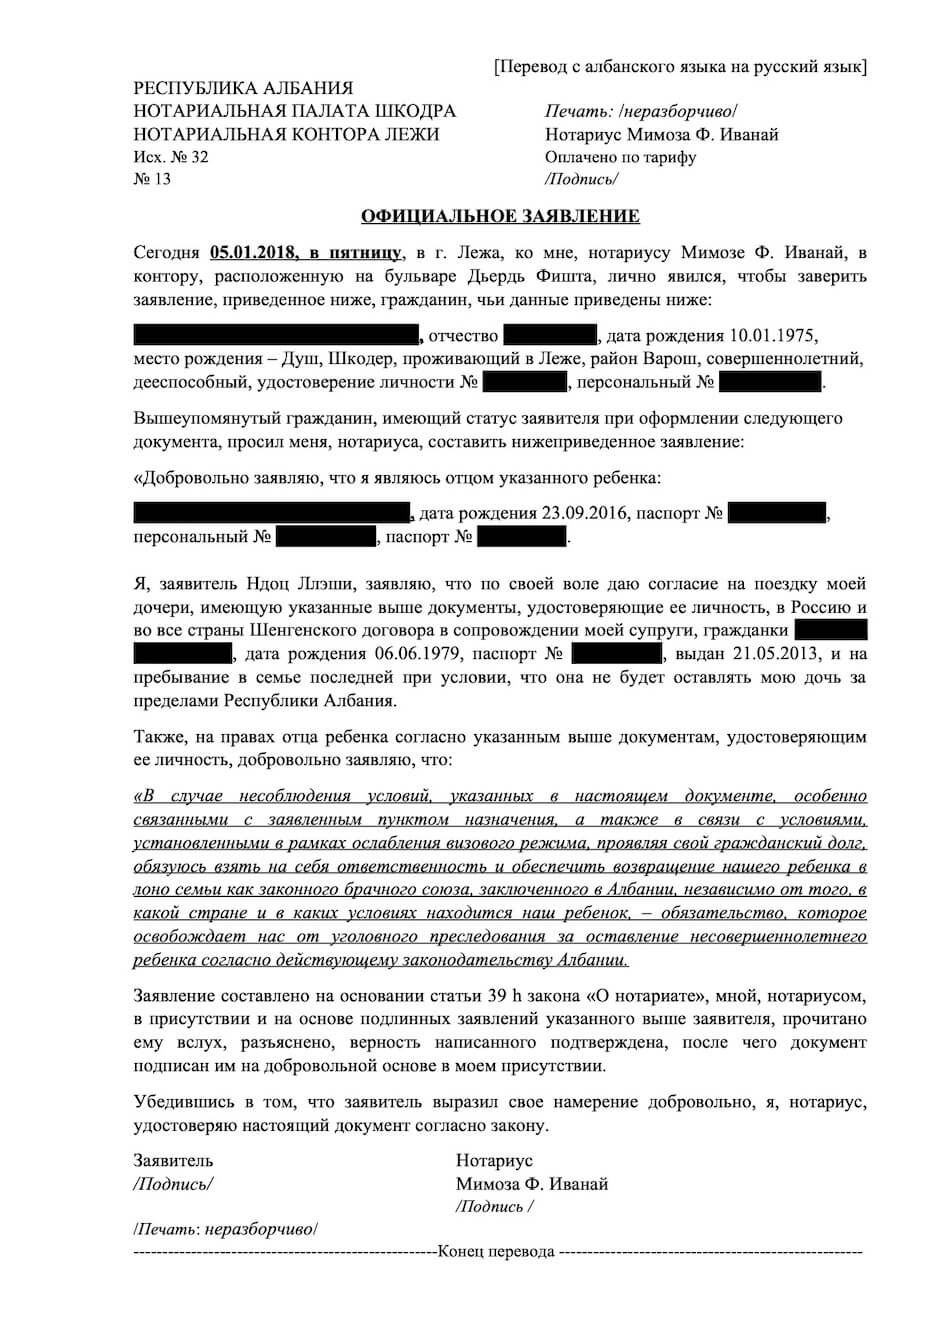 A parental consent translated from Albanian into Russian